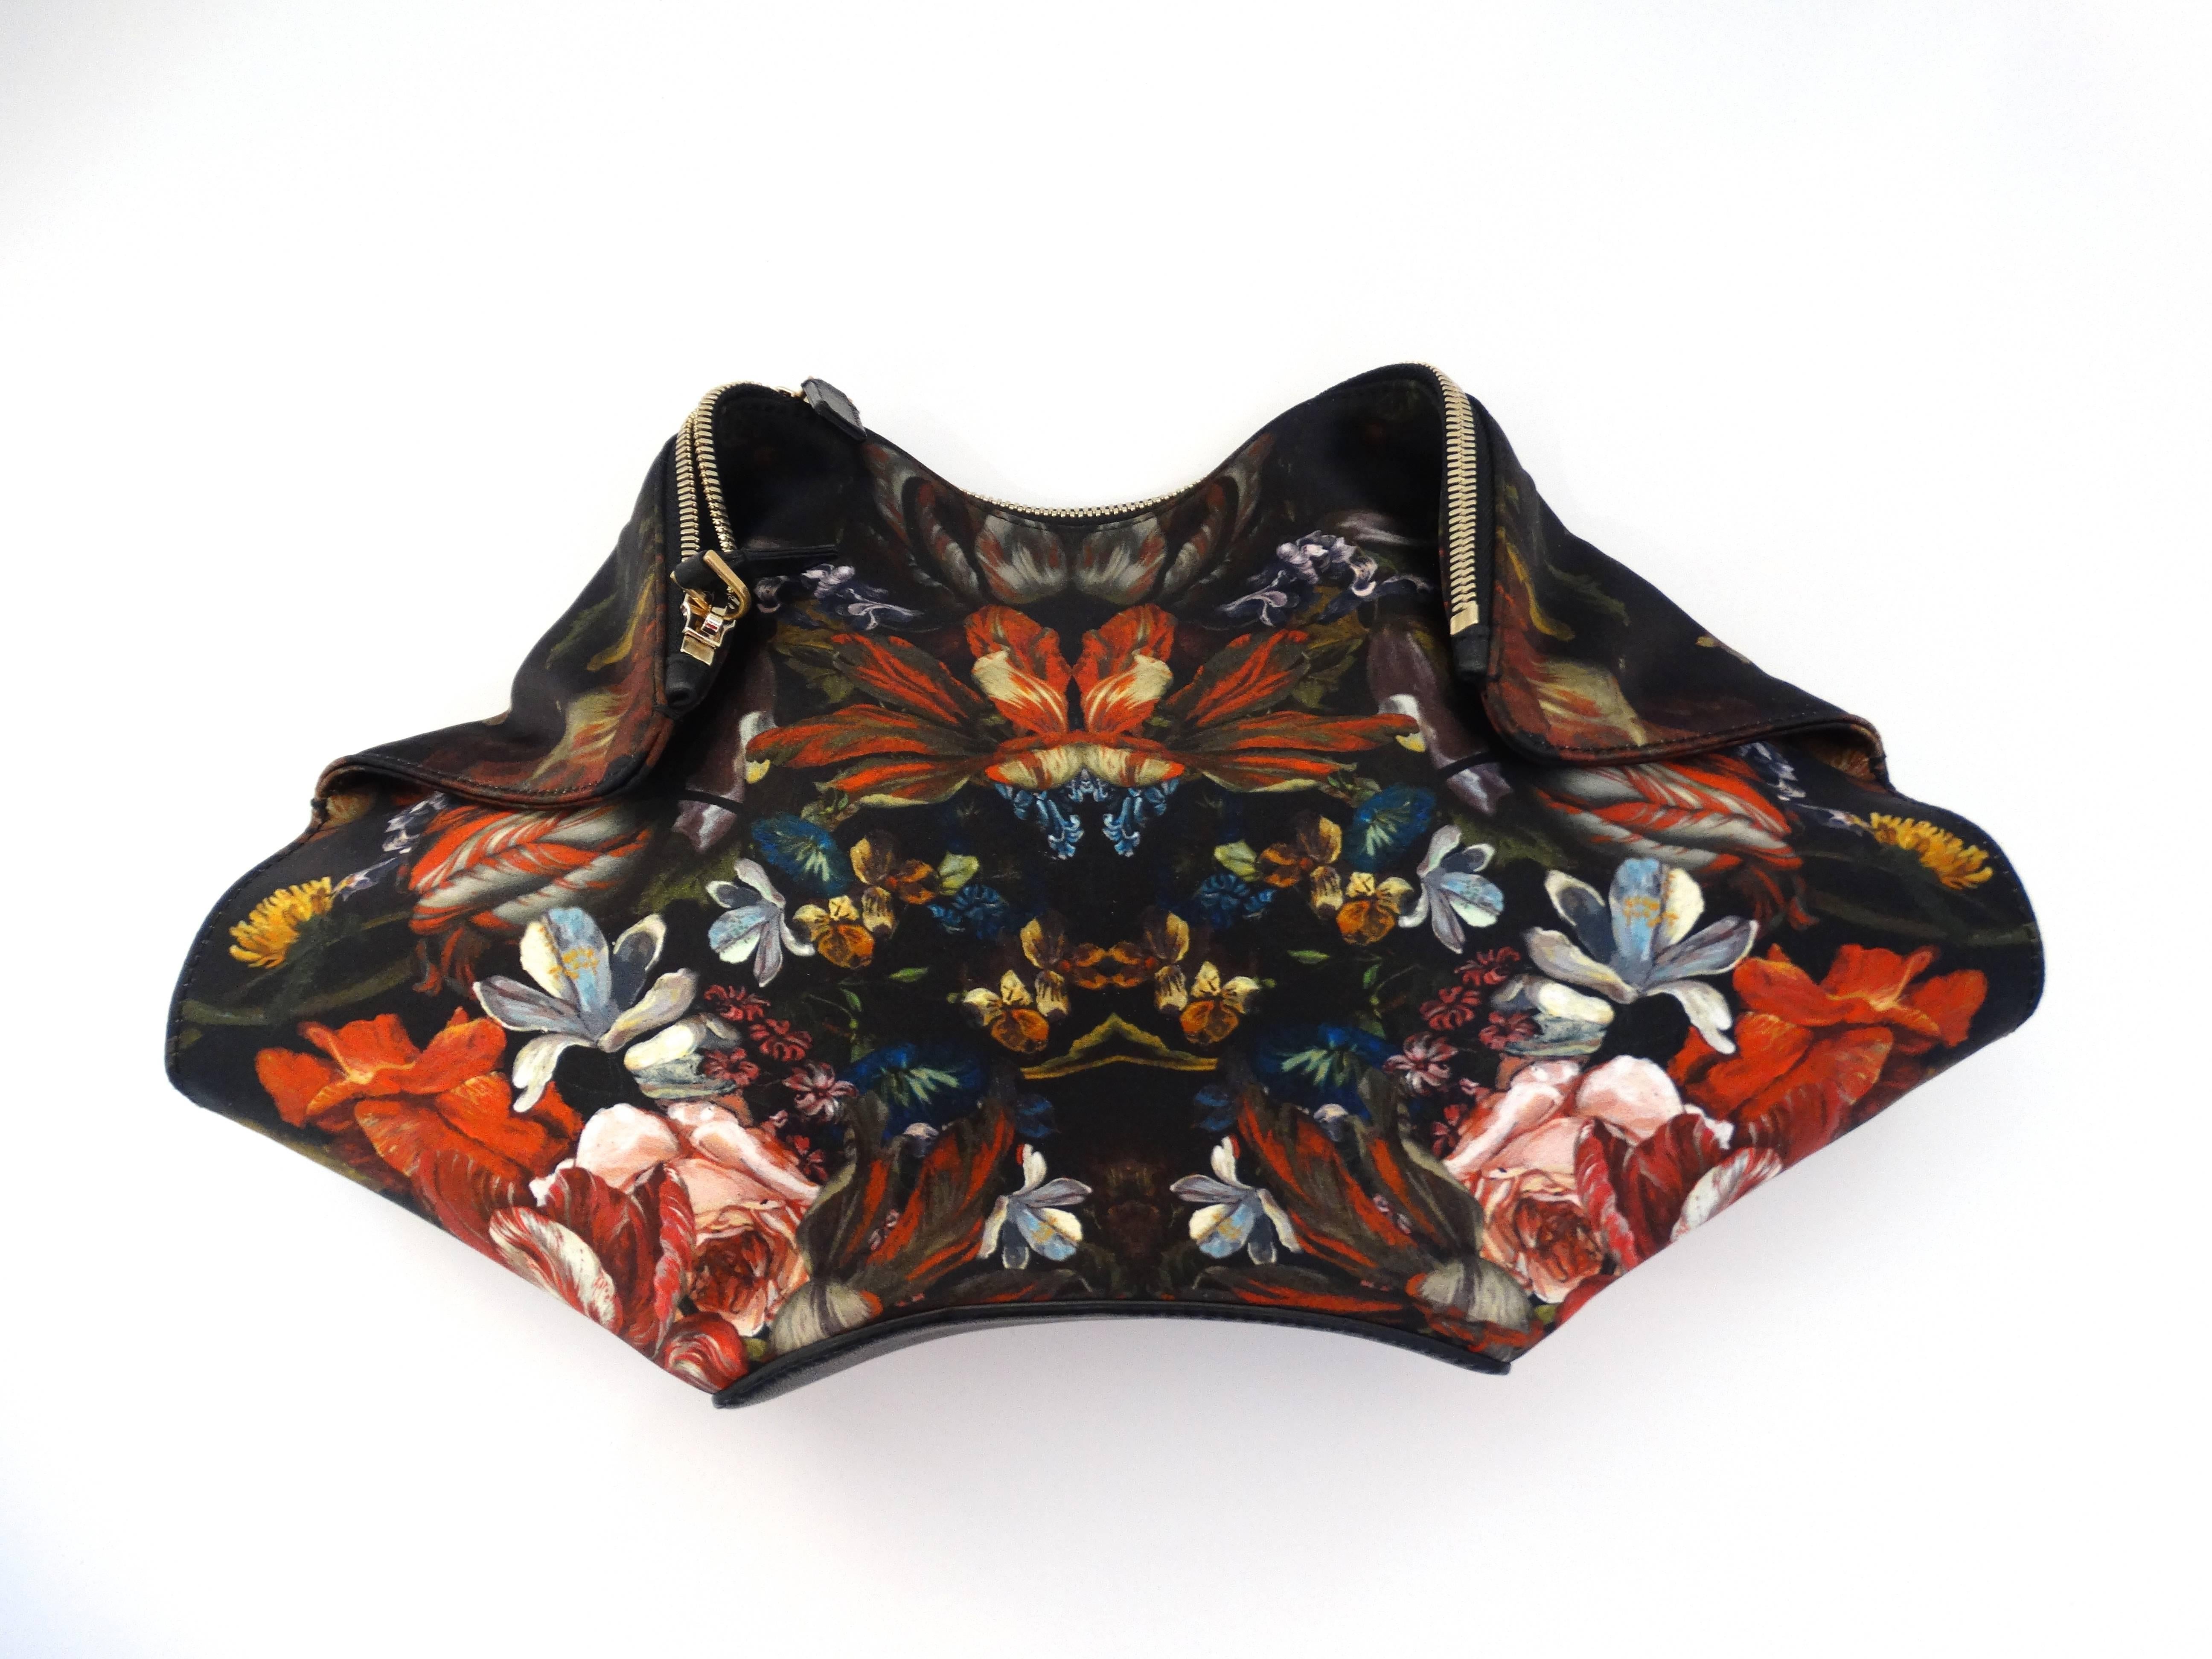 Incredible silk satin Botanical printed Alexander McQueen De Manta Clutch. Magnetized folds at either side. Unzips along the top. Fully lined interior with zip pocket Goldtone hardware. 15